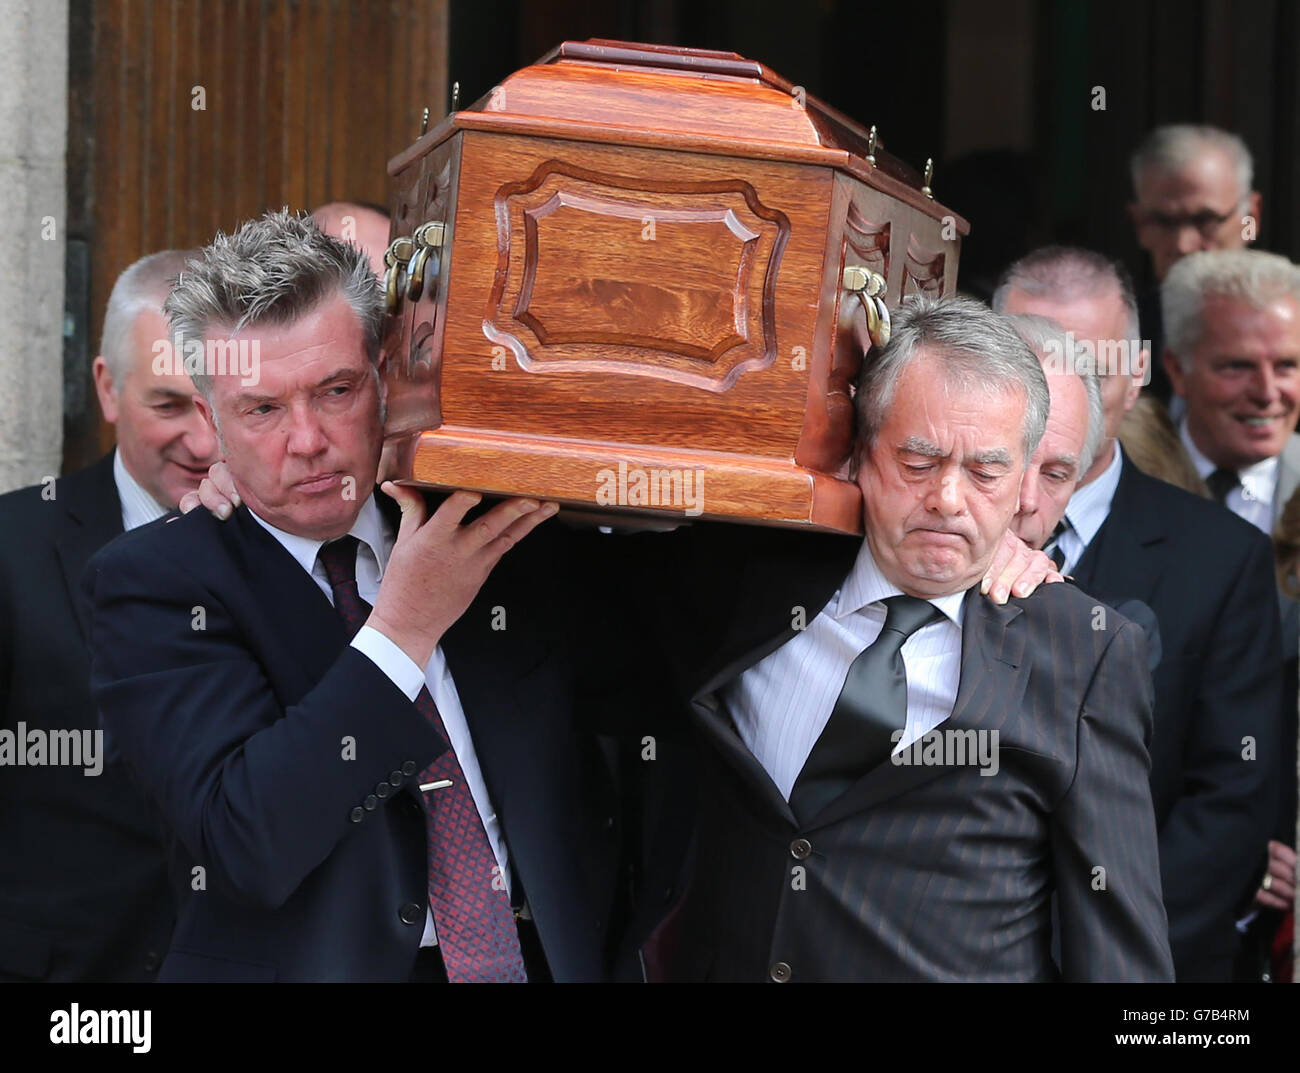 The coffin is carried by Undertones Bass Guitar player and Radio Ulster  Producer Michael Bradley (left) and Co-Host Sean Coyle (right) during the  funeral of BBC broadcaster Gerry Anderson at St Eugene's